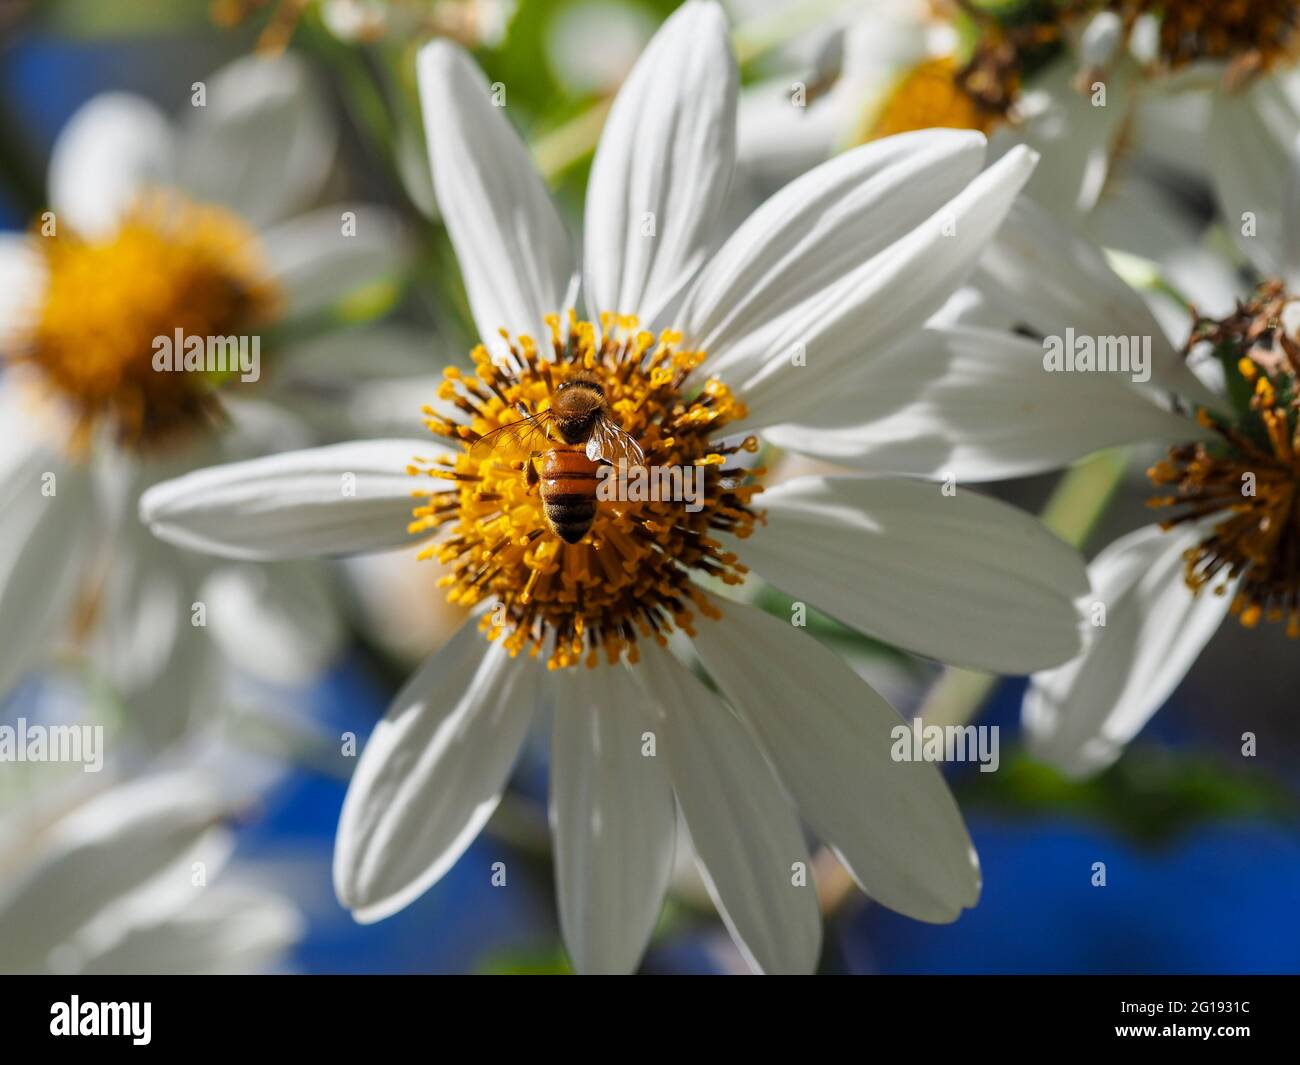 Flowers. Pollinating Bees. Nature macro of a white Tree Daisy Flower with a bee collecting nectar and pollen right in the middle of its yellow centre. Stock Photo